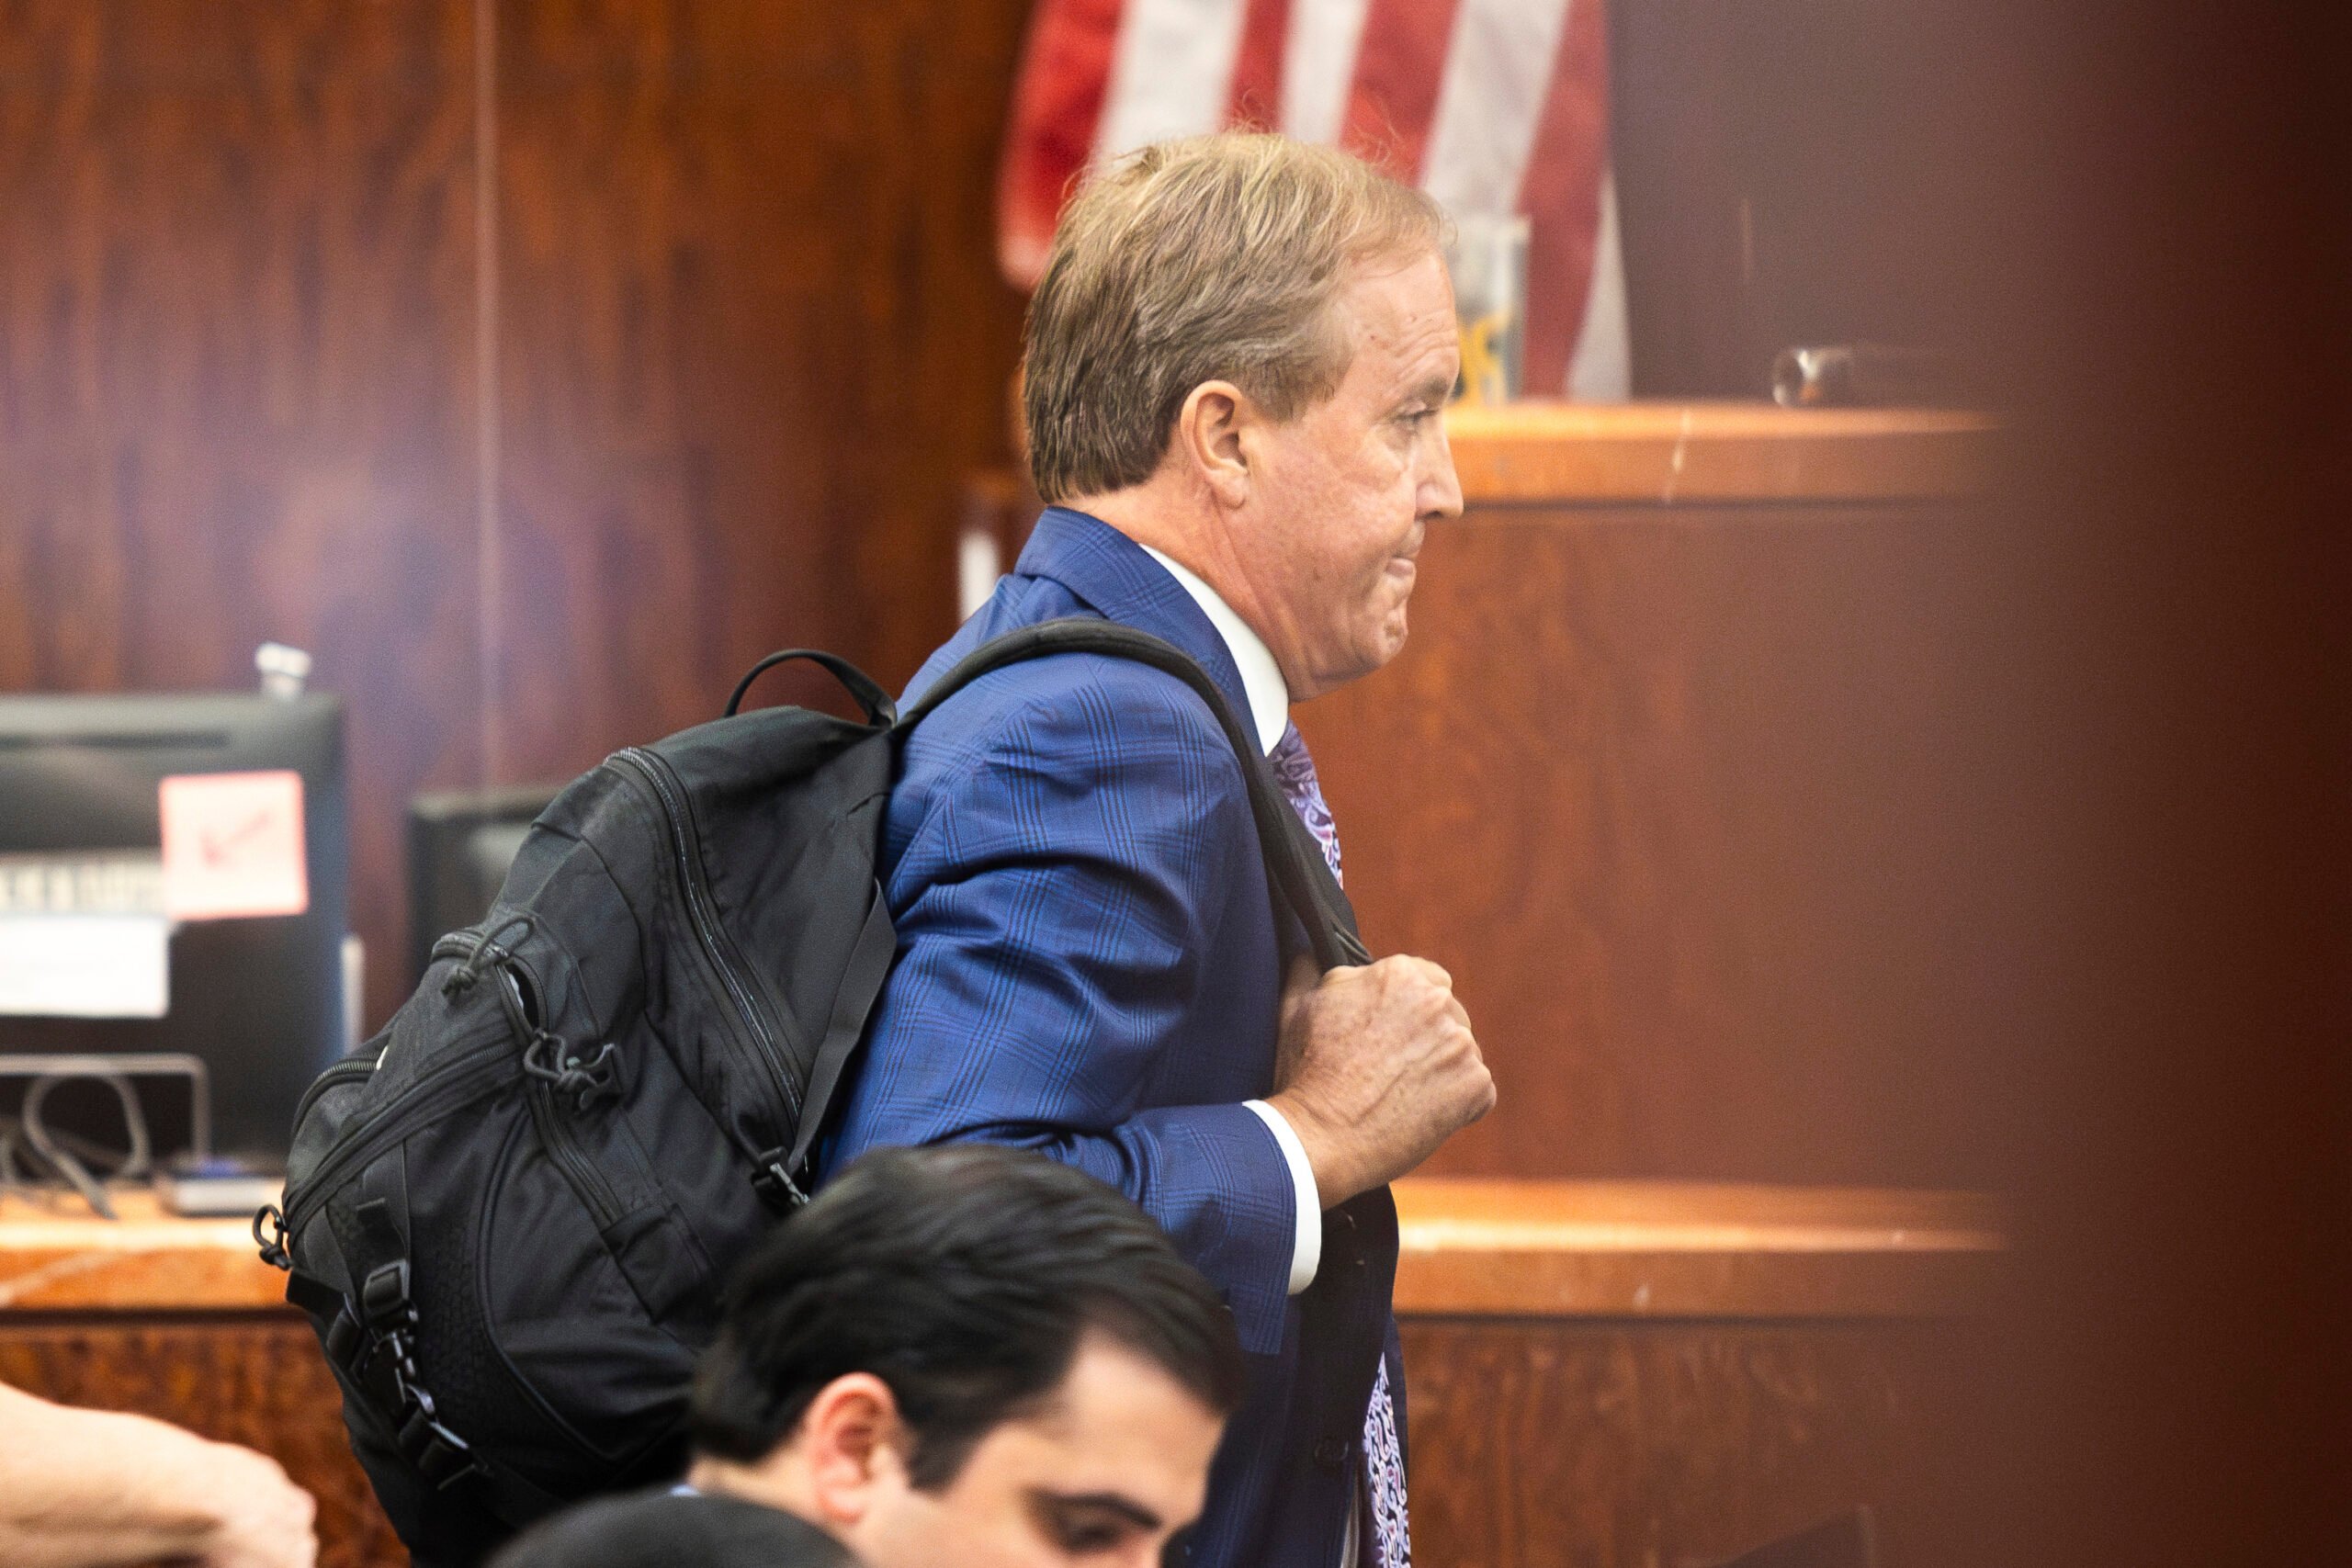 Ken Paxton, seen in profile in a blue suit jacket and black backpack, has a somewhat goofy, tongue-in-lips expression as he hoists his bag and carries it out of a courtroom.